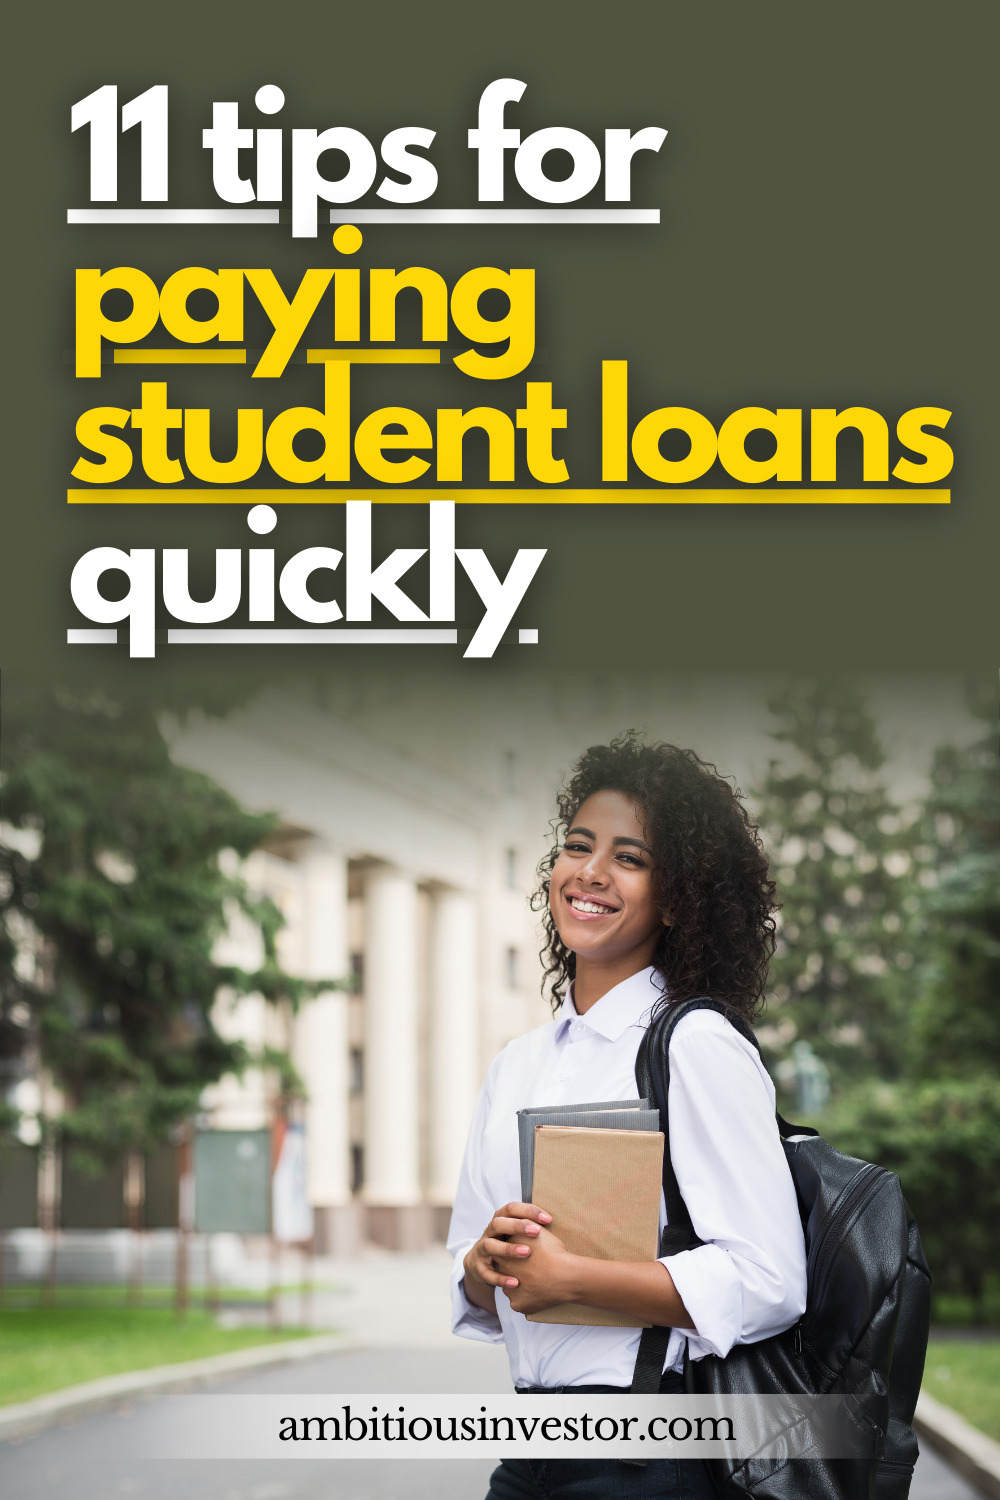 11 Tips for Paying Student Loans Quickly